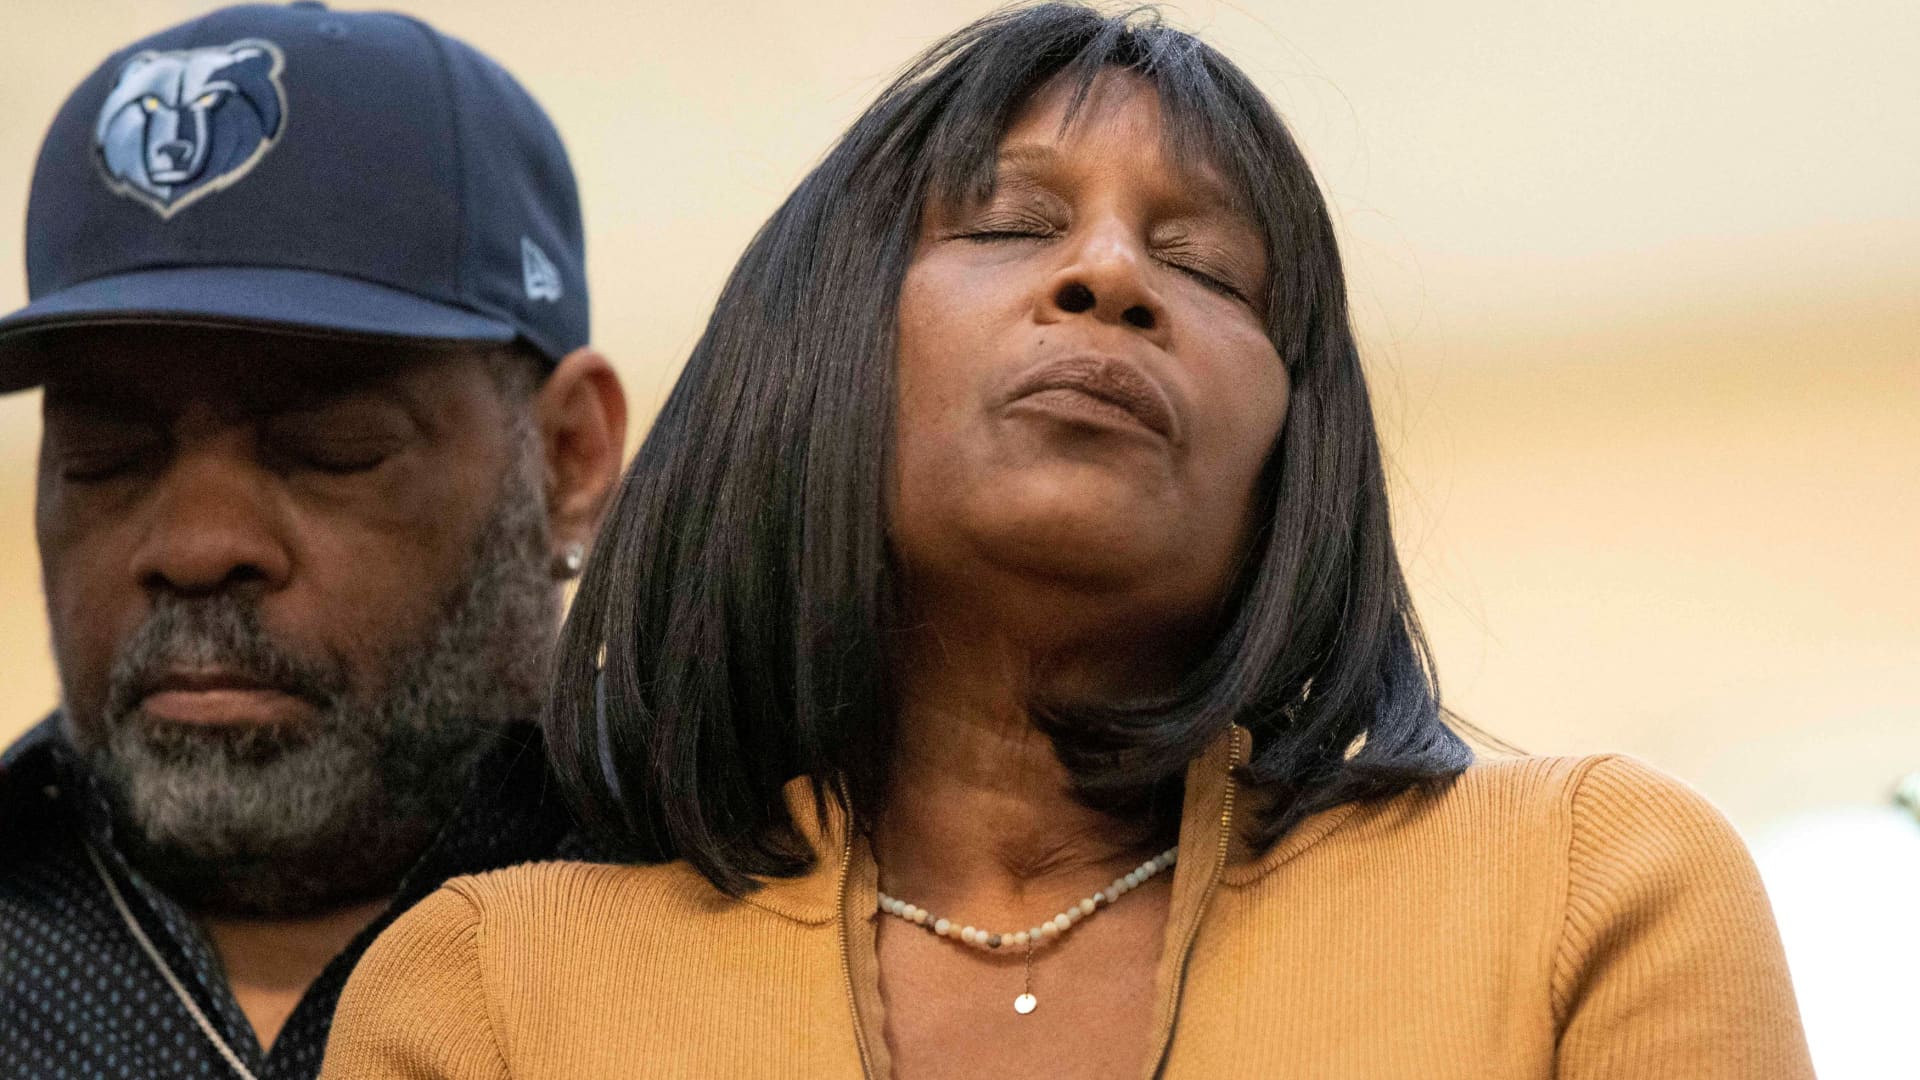 RowVaughn Wells, mother of Tyre Nichols, a young Black man who was killed during a traffic stop by Memphis police officers, reacts during a news conference at Mt. Olive Cathedral CME Church in Memphis, Tennessee, January 27, 2023.